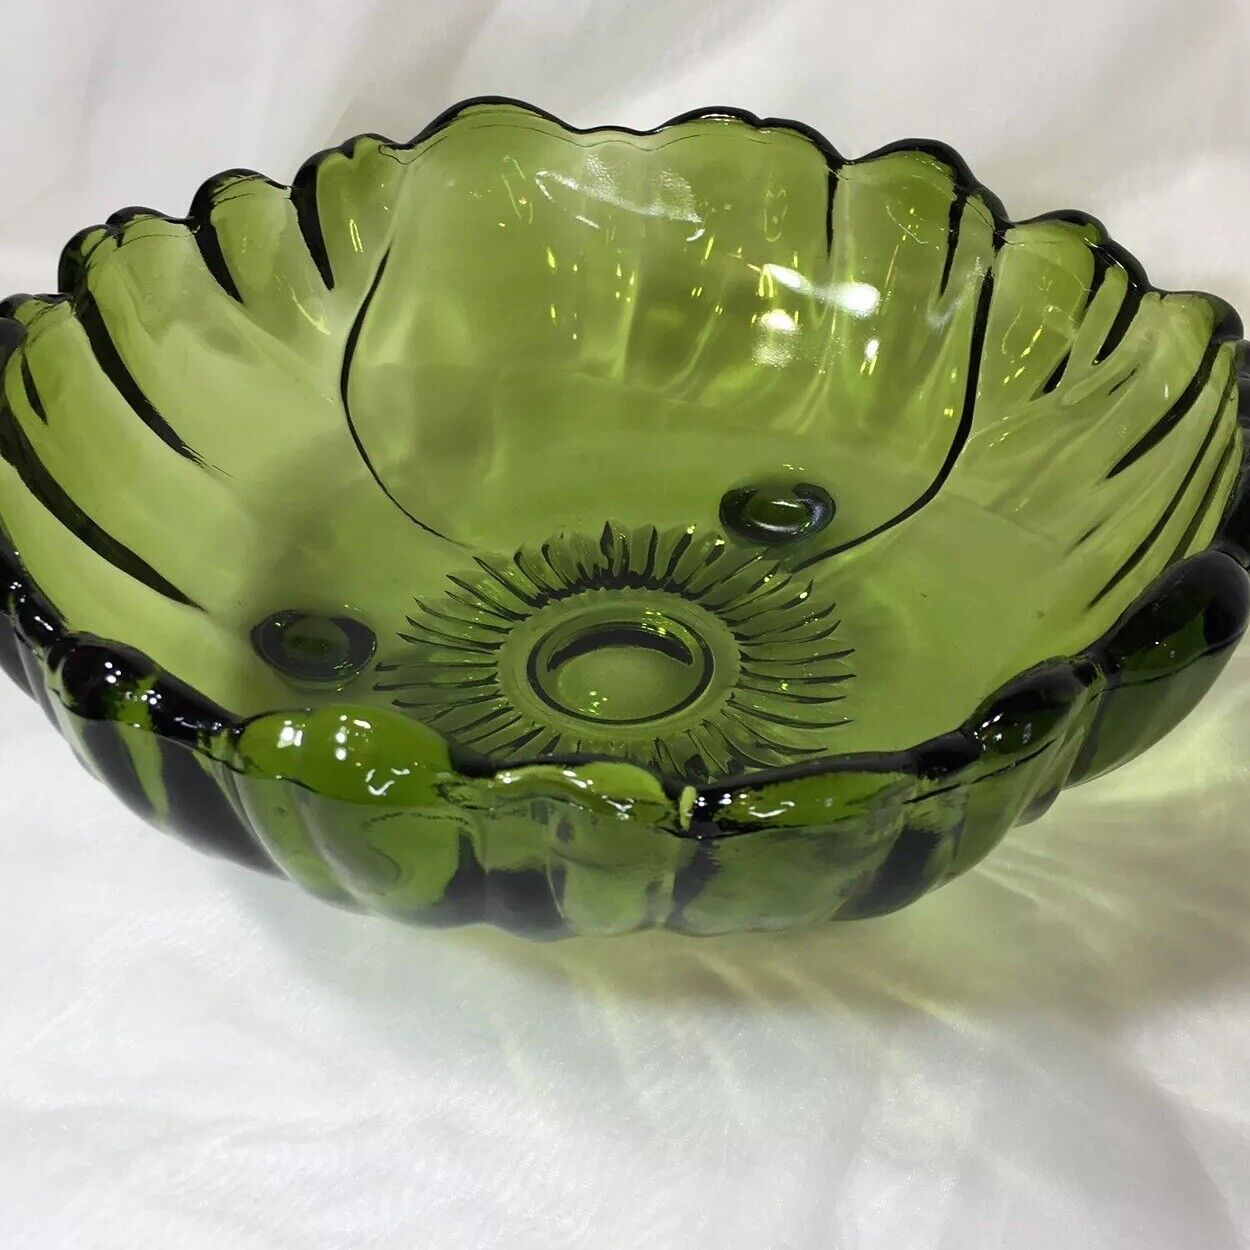 11” Vintage Footed Bowl, Indiana Glass Co., Olive Green, Collectible Decor❤️